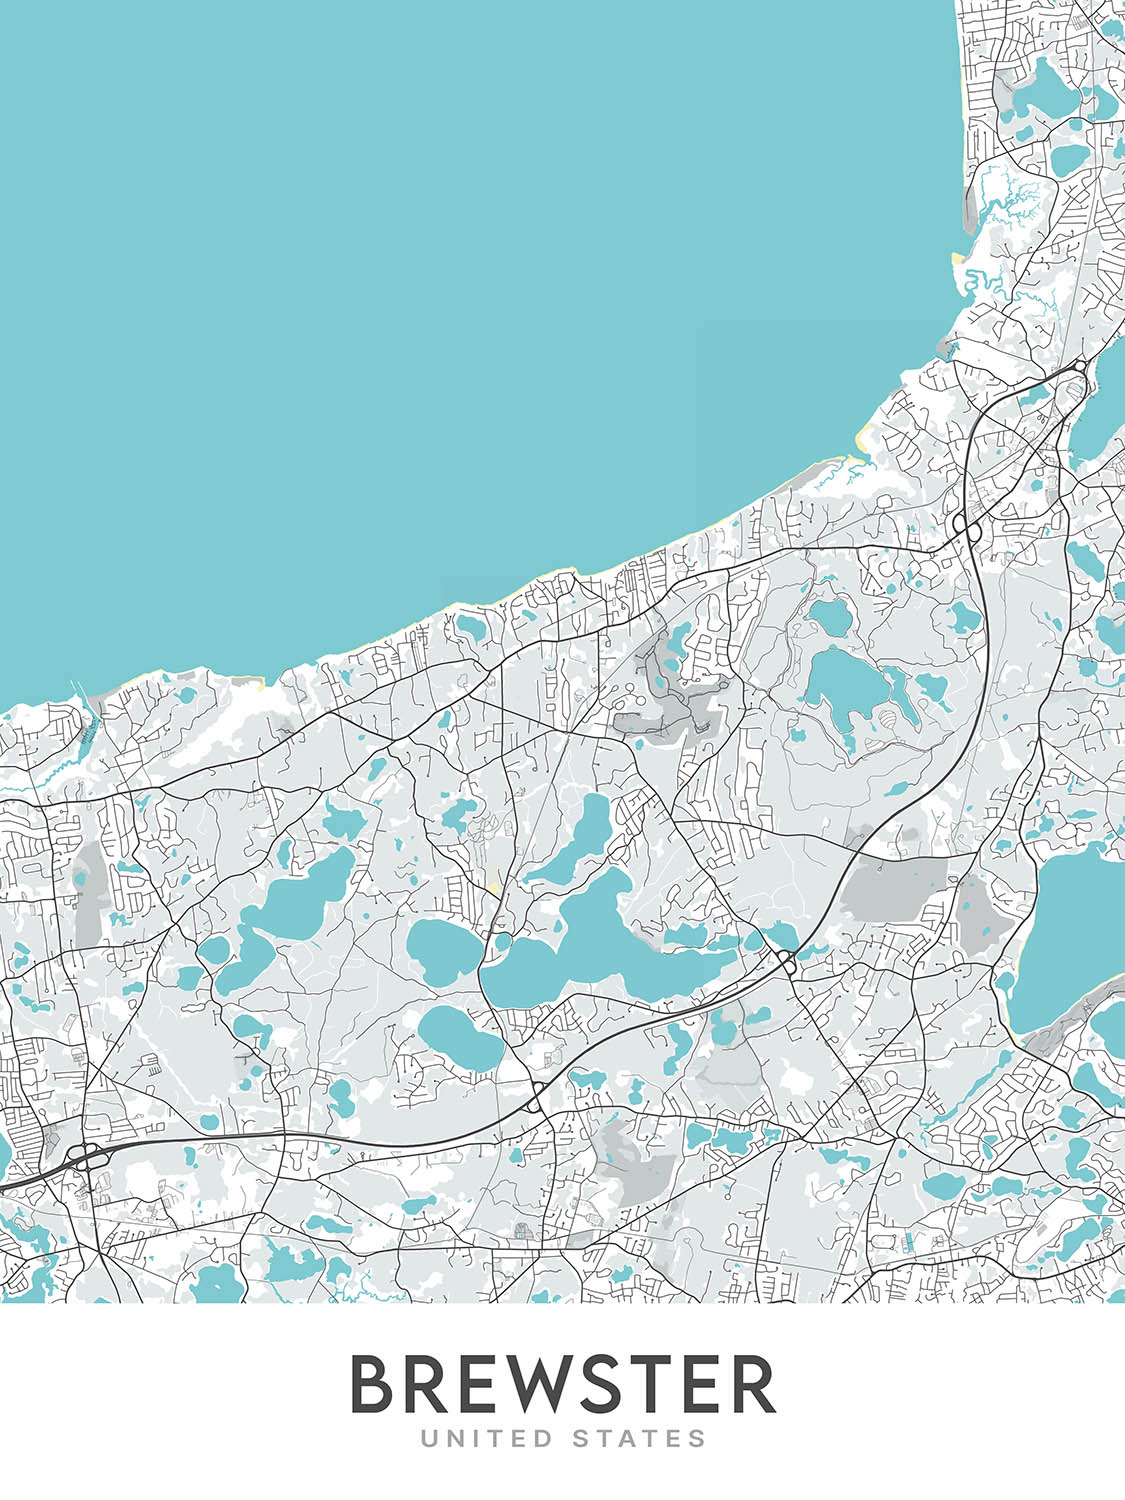 Modern City Map of Brewster, MA: Cape Cod National Seashore, Nickerson State Park, Route 6A, Route 28, Scargo Lake